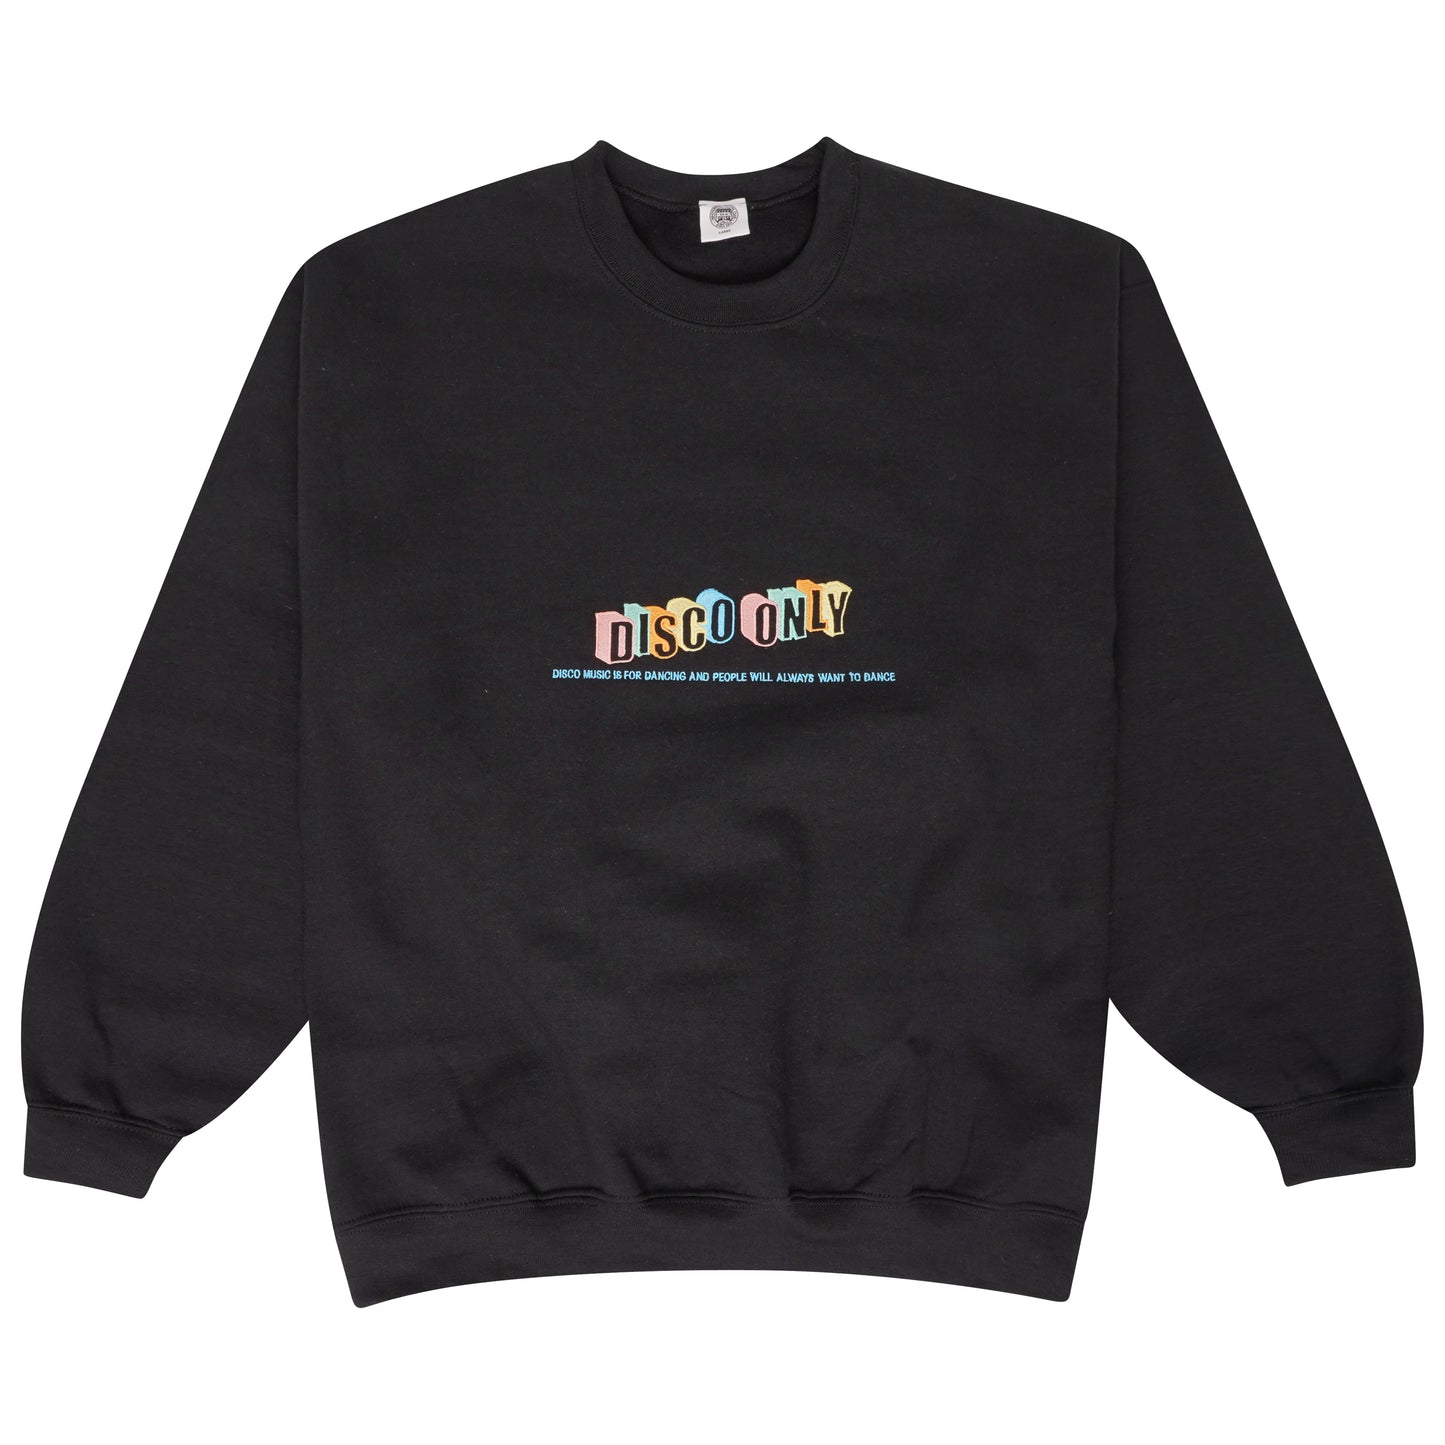 DISCO ONLY 'Dancers' Sweater - Black